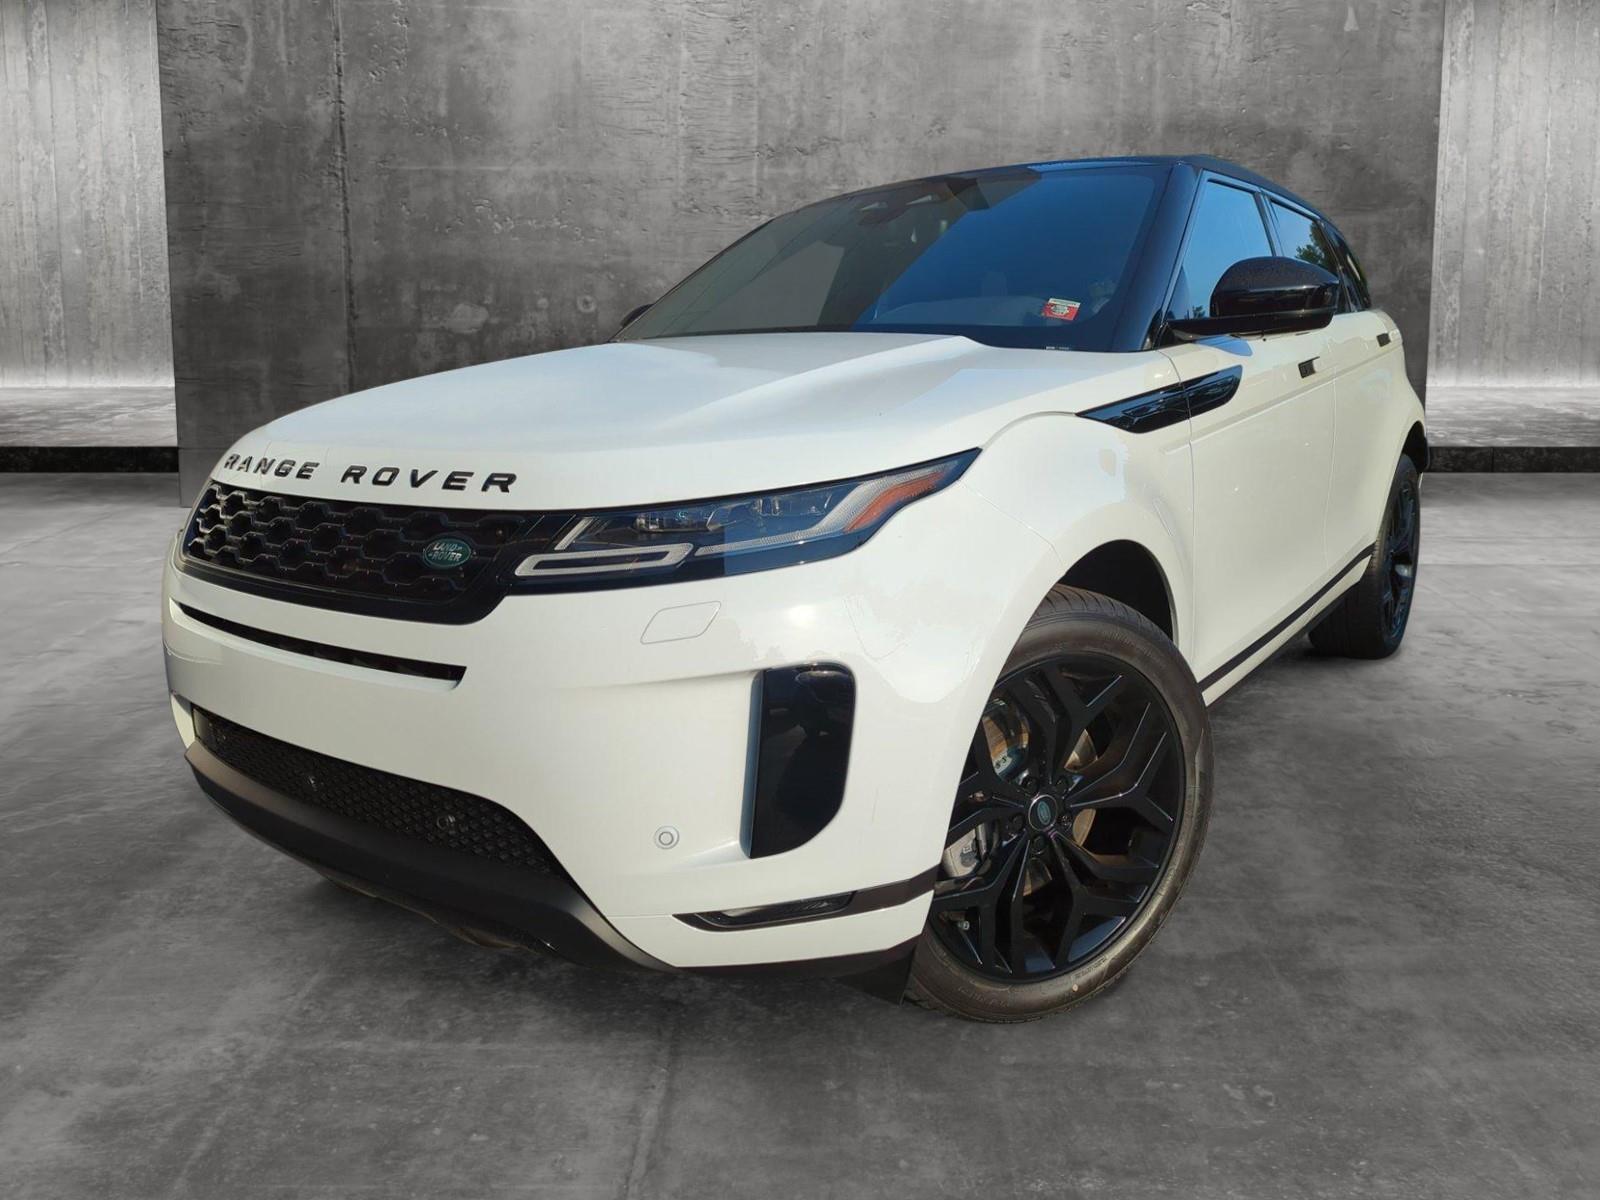 NEW 2023 Land Rover Range Rover Evoque for sale in Elmsford, NY